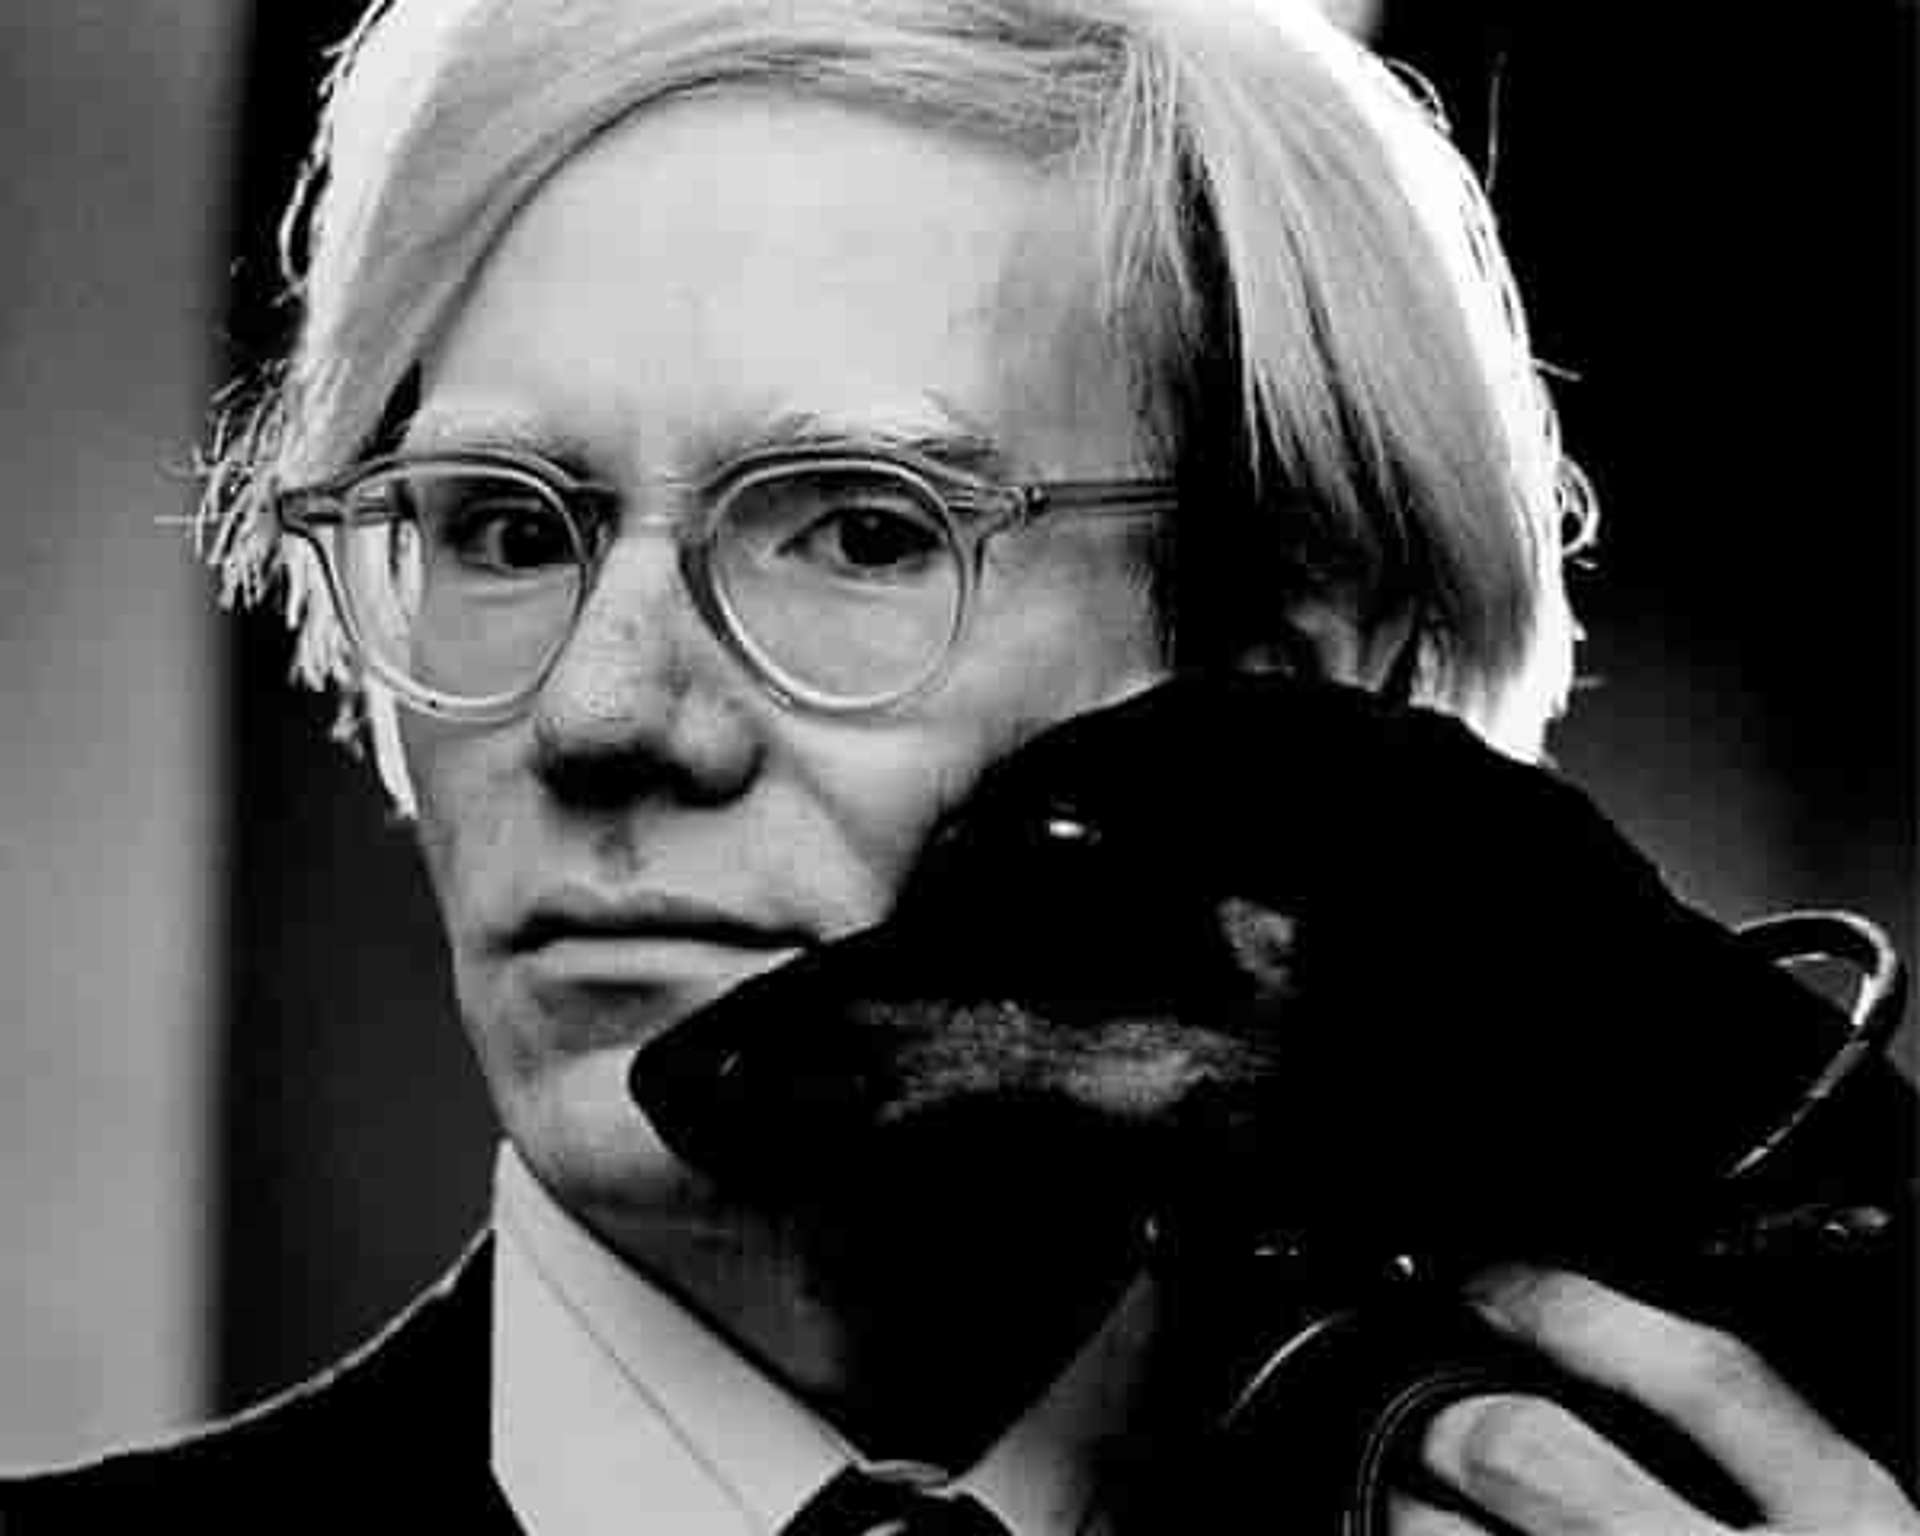 Black and white photograph of Andy Warhol holding a dog